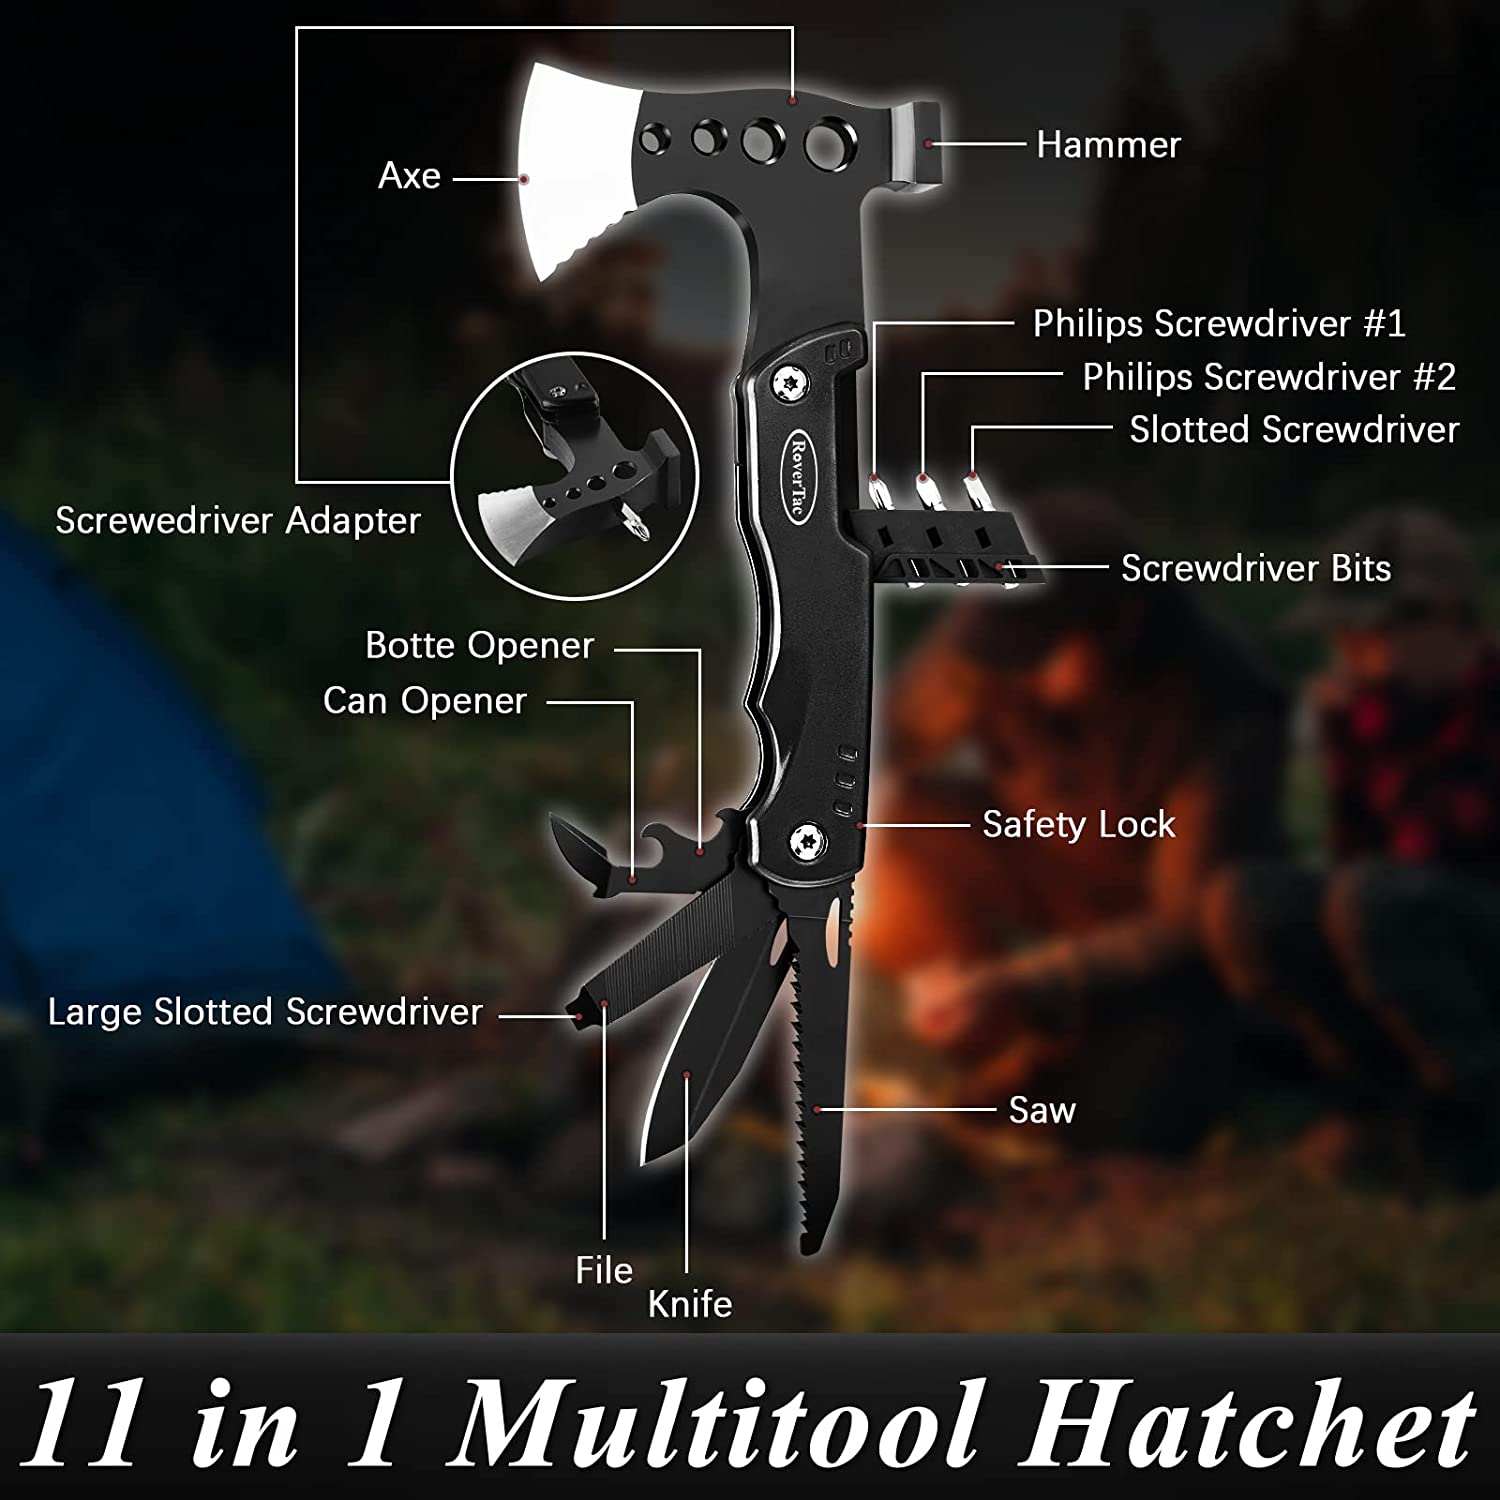 All In One Multitool Axe Survival Gear Camping Accessories Hiking Cool Gadgets